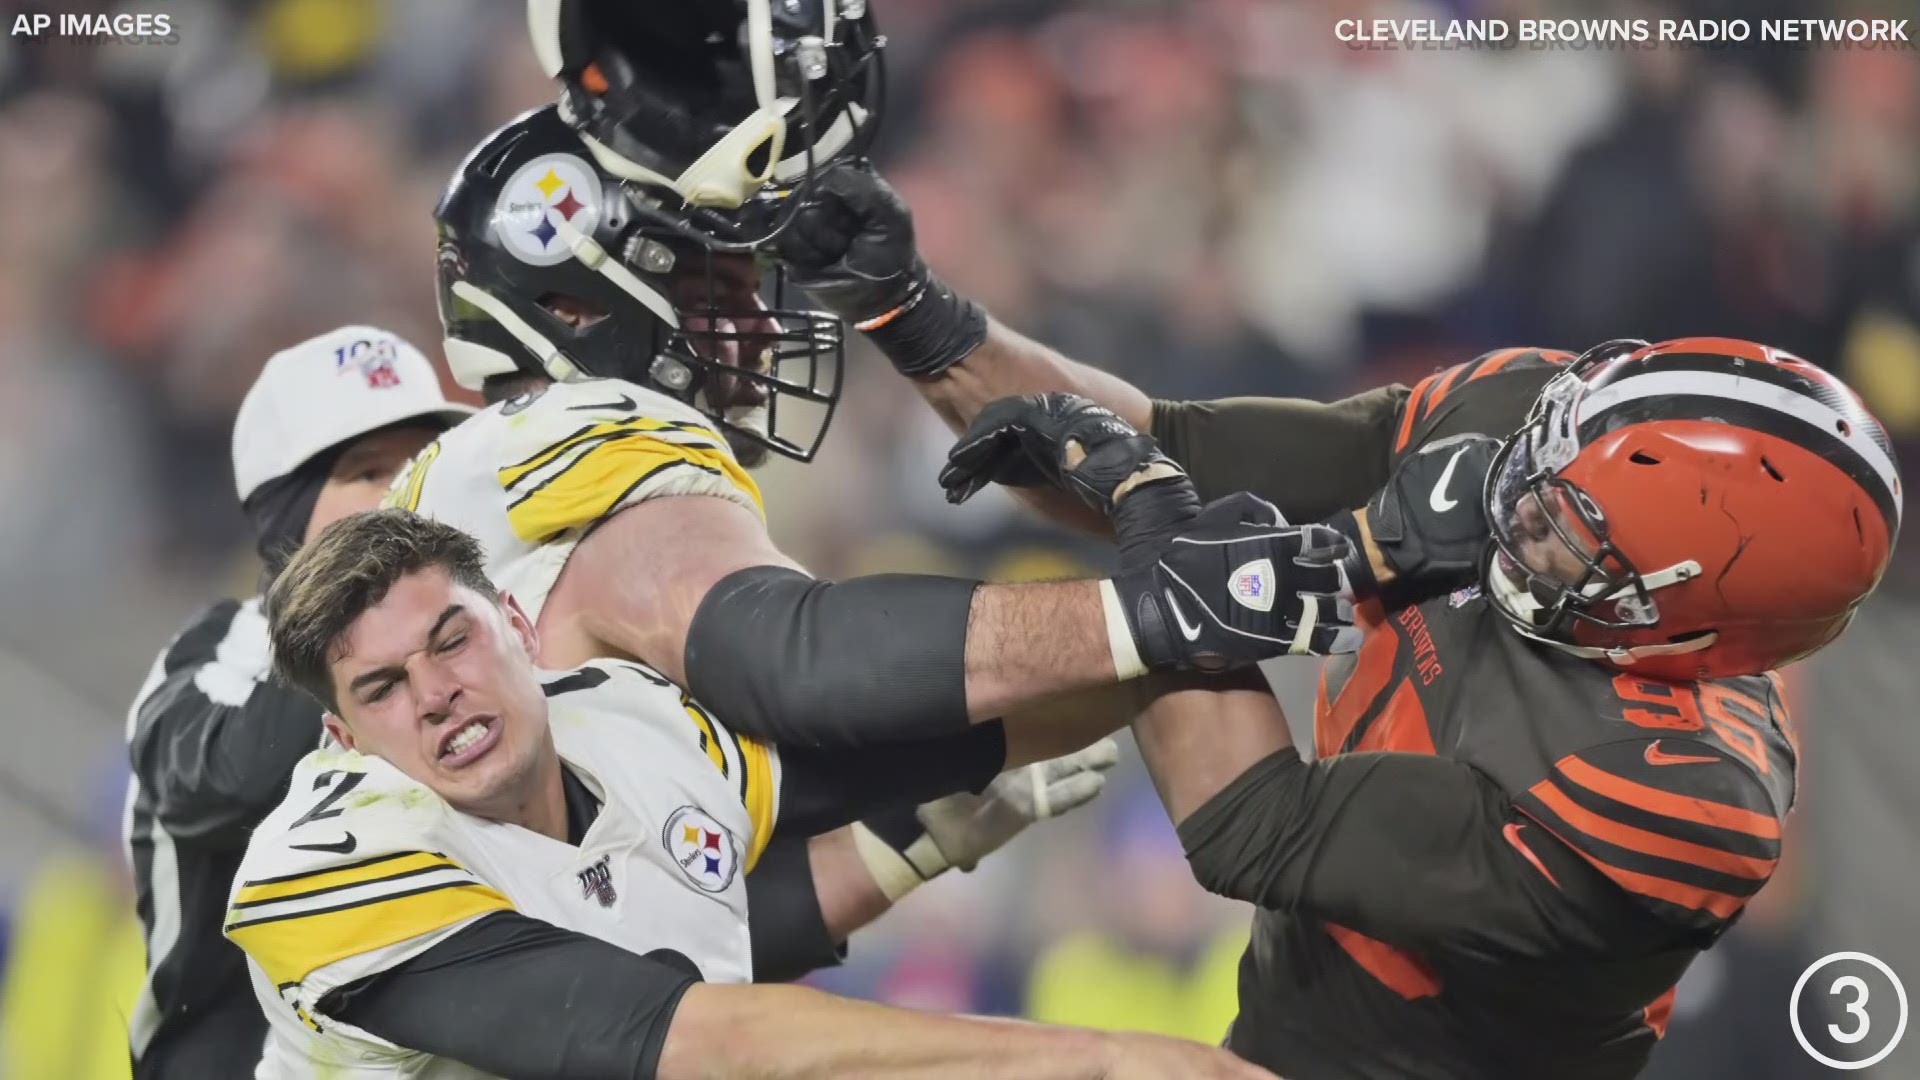 Ugly ending!  Cleveland Browns defensive end Myles Garrett swung a helmet at Pittsburgh Steelers quarterback Mason Rudolph during a fight between the two teams.